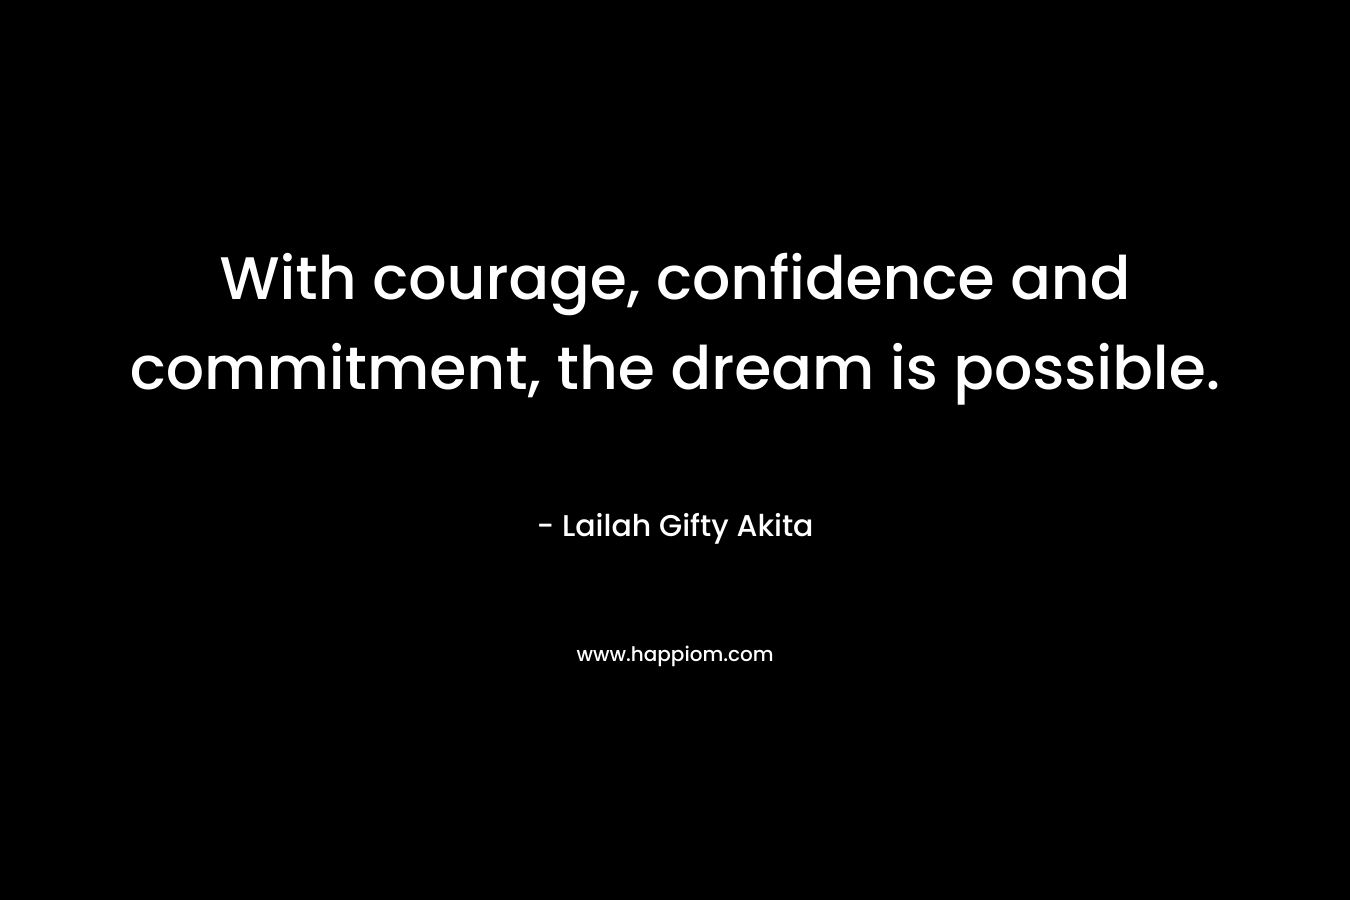 With courage, confidence and commitment, the dream is possible.